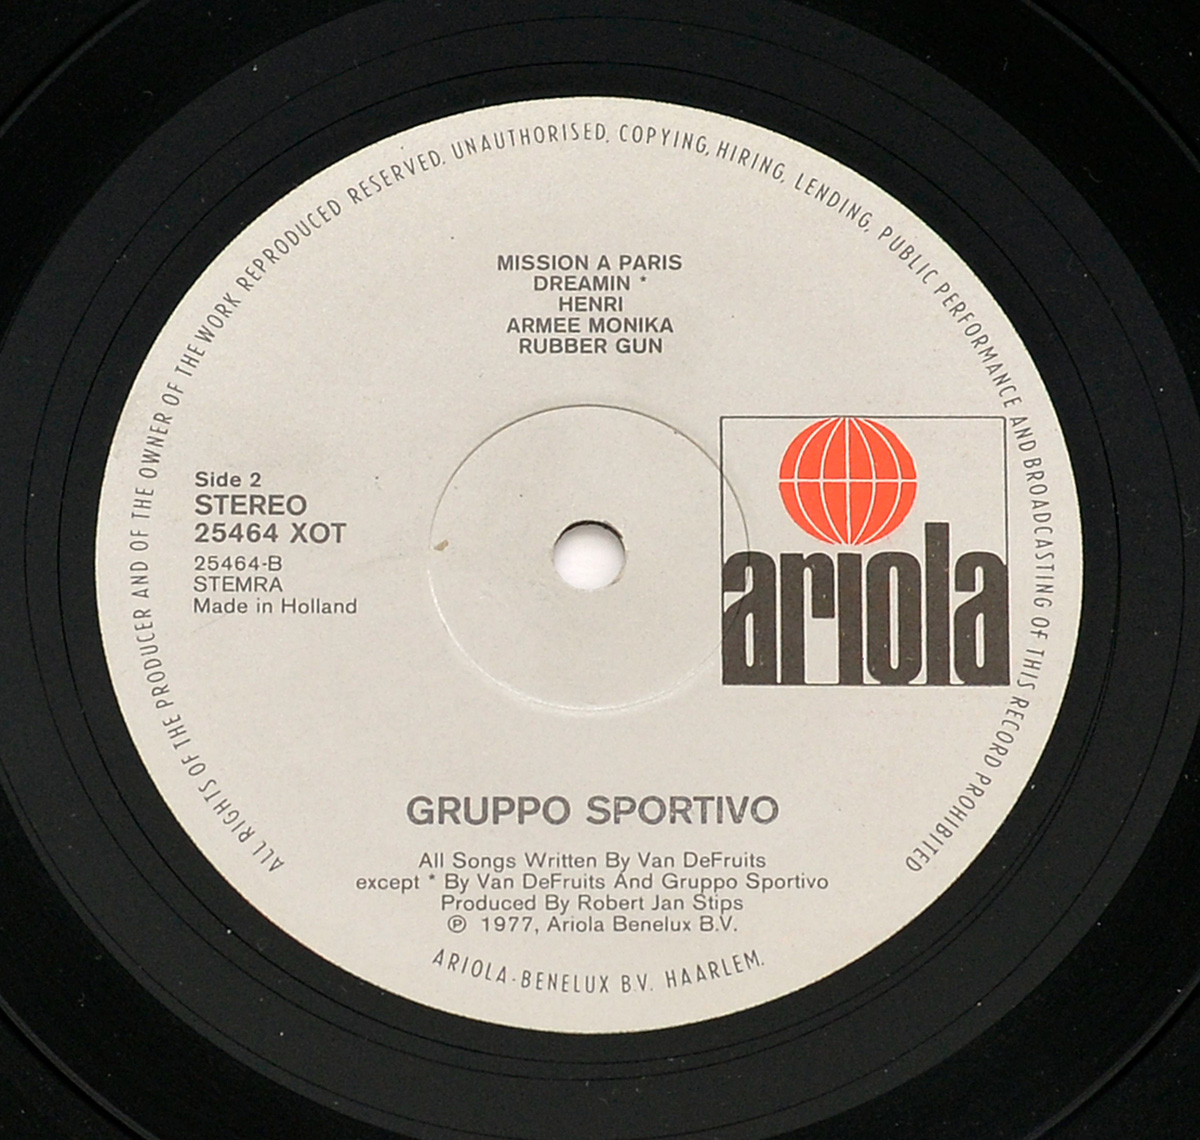 Photo of 12" LP Record Side Two GRUPPO SPORTIVO 10 Mistakes  Vinyl Record Store https://vinyl-records.nl//